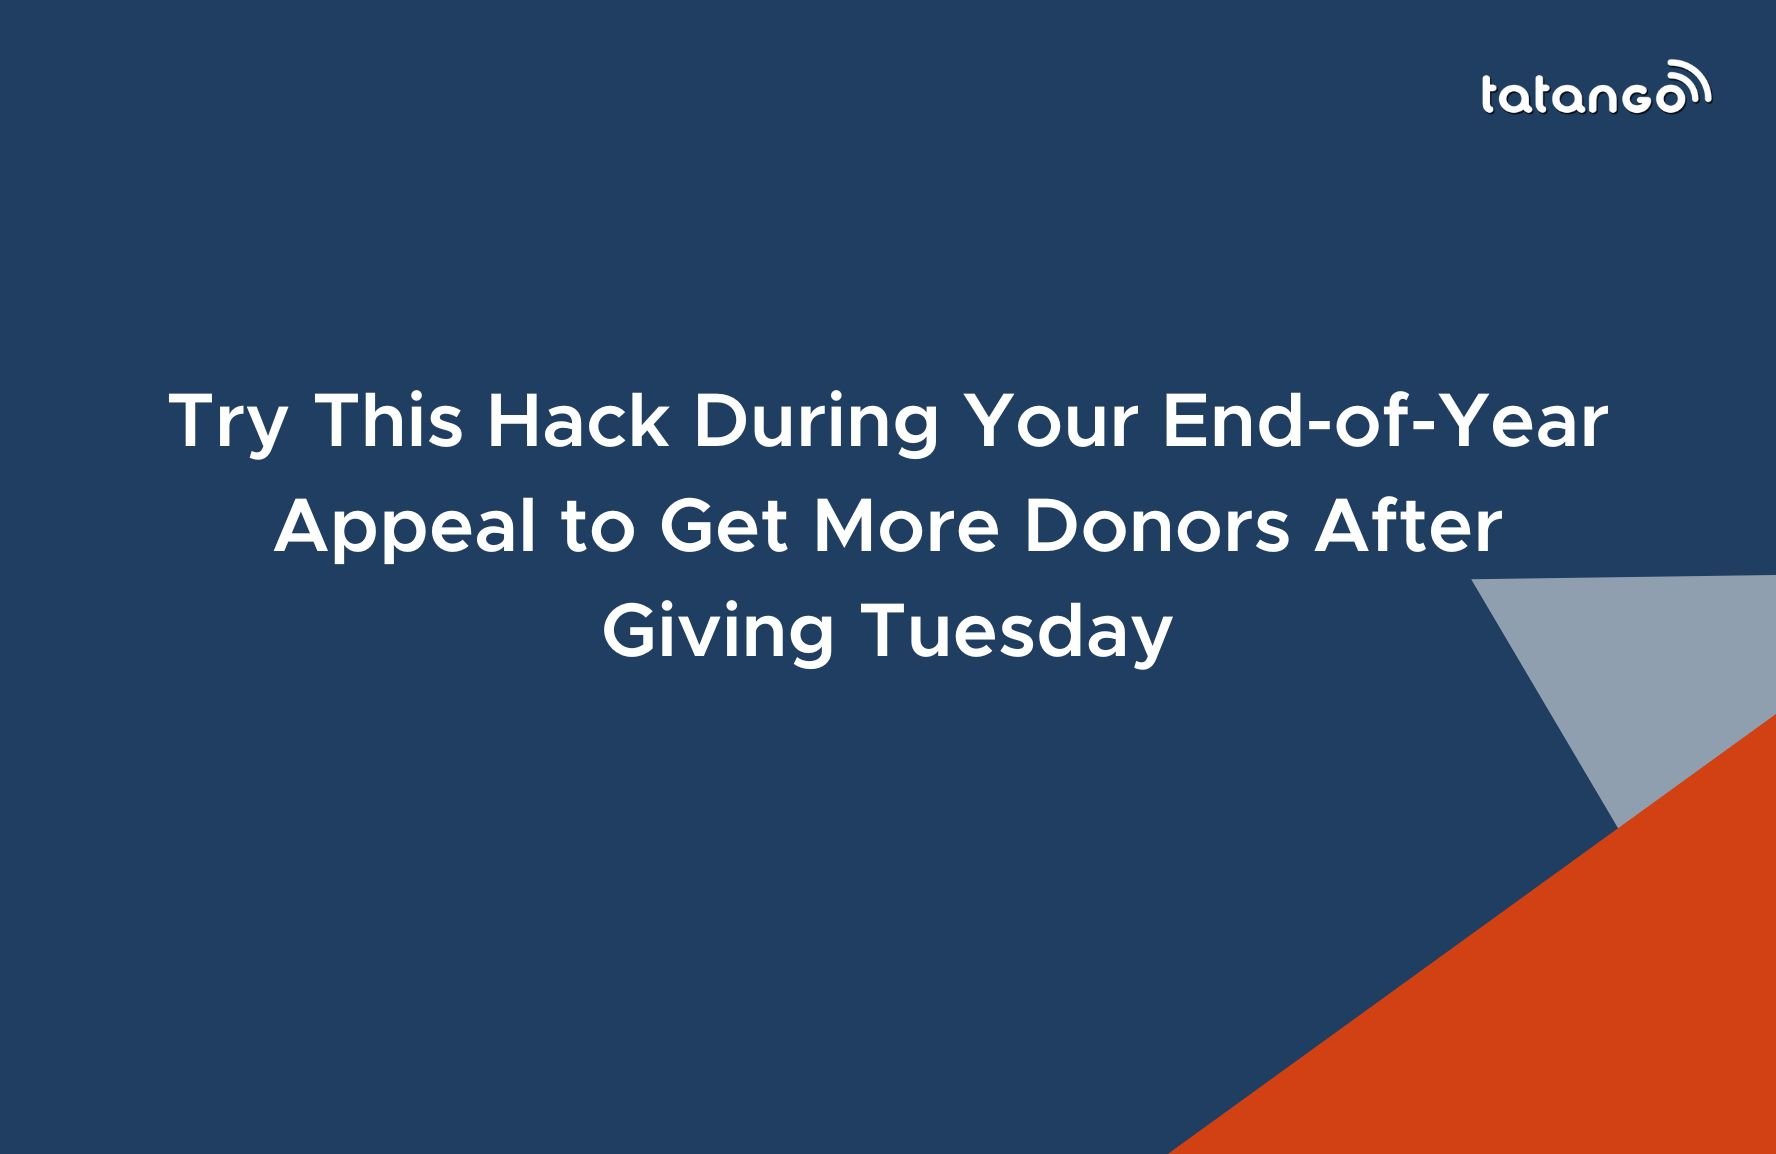 Try This Hack During Your End-of-Year Appeal to Get More Donors After Giving Tuesday